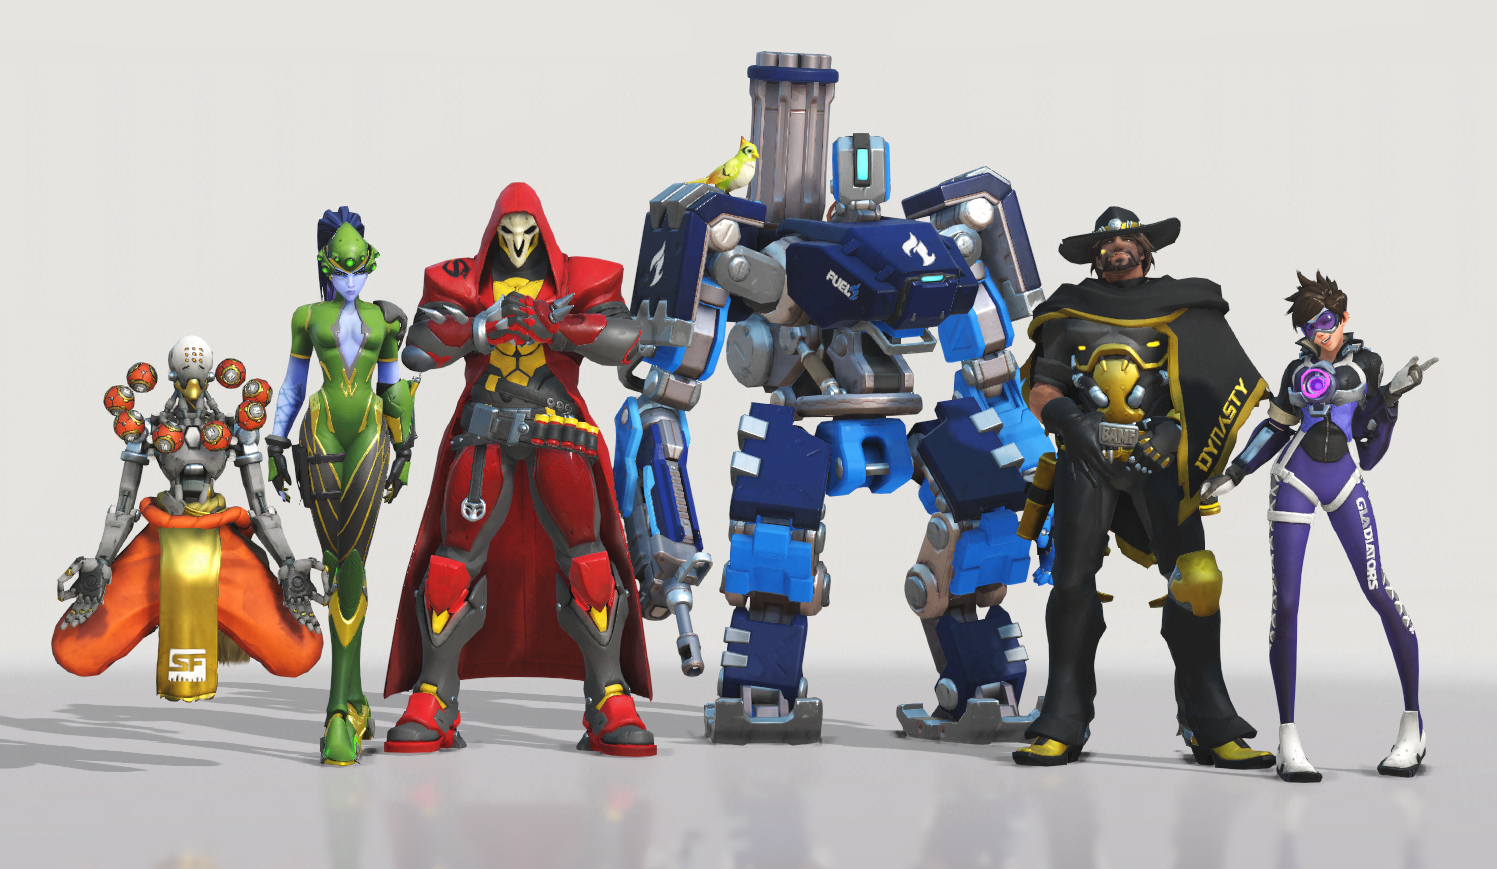 You can now earn ingame skins by watching Overwatch League